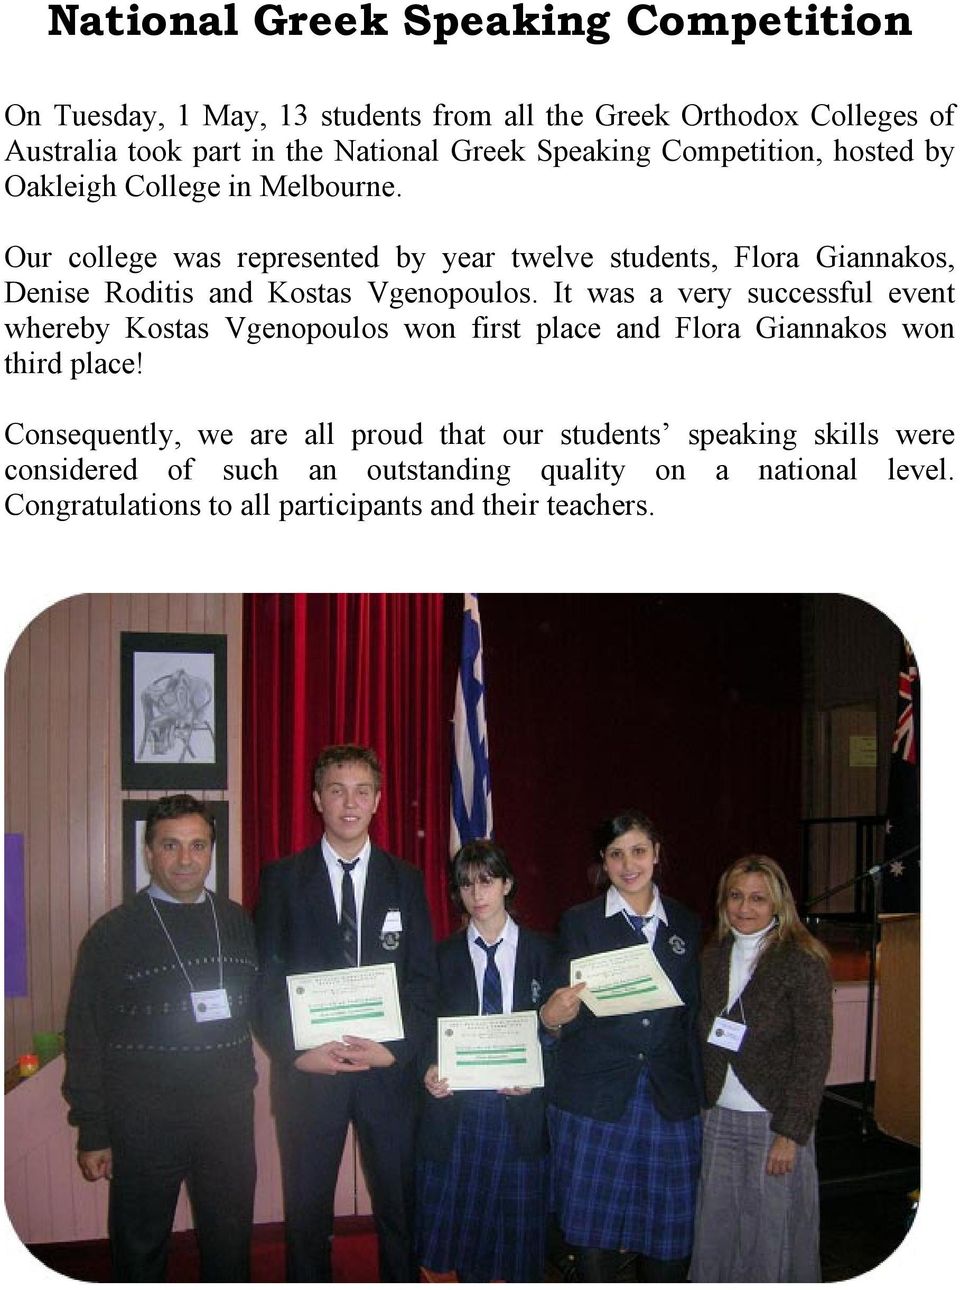 Our college was represented by year twelve students, Flora Giannakos, Denise Roditis and Kostas Vgenopoulos.